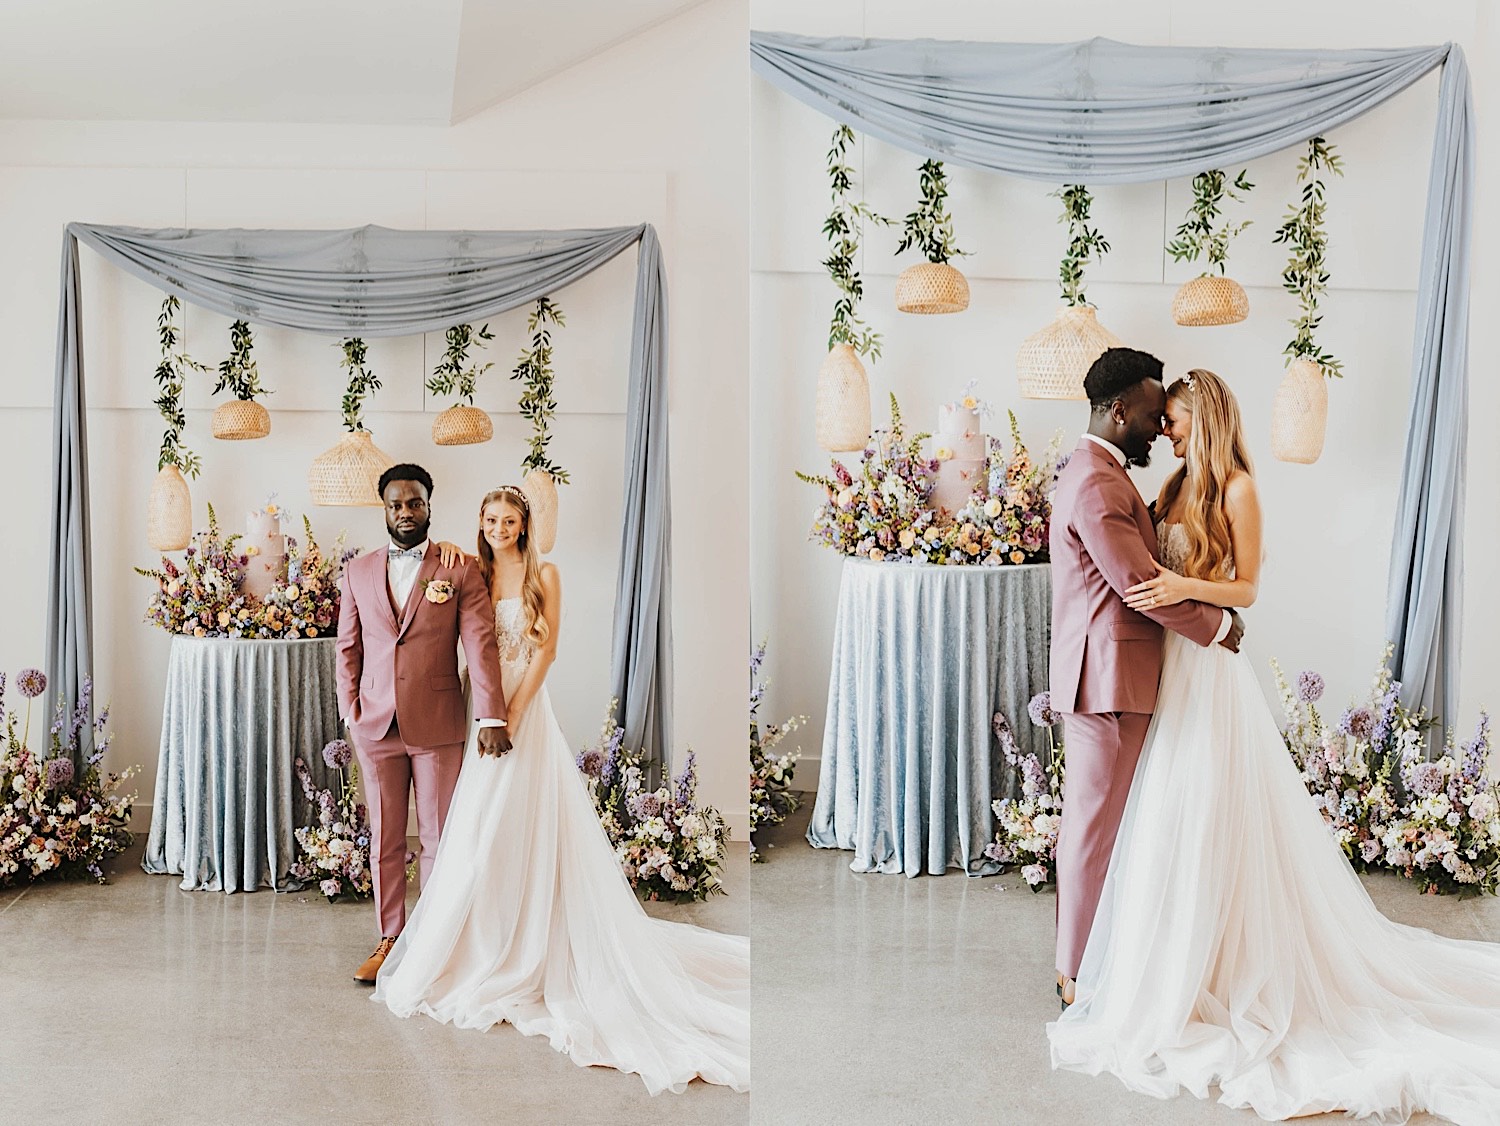 2 photos side by side of a bride and groom standing next to one another, in the left they are smiling at the camera while standing in front of their cake, in the right they are smiling at one another in the same spot while touching foreheads together